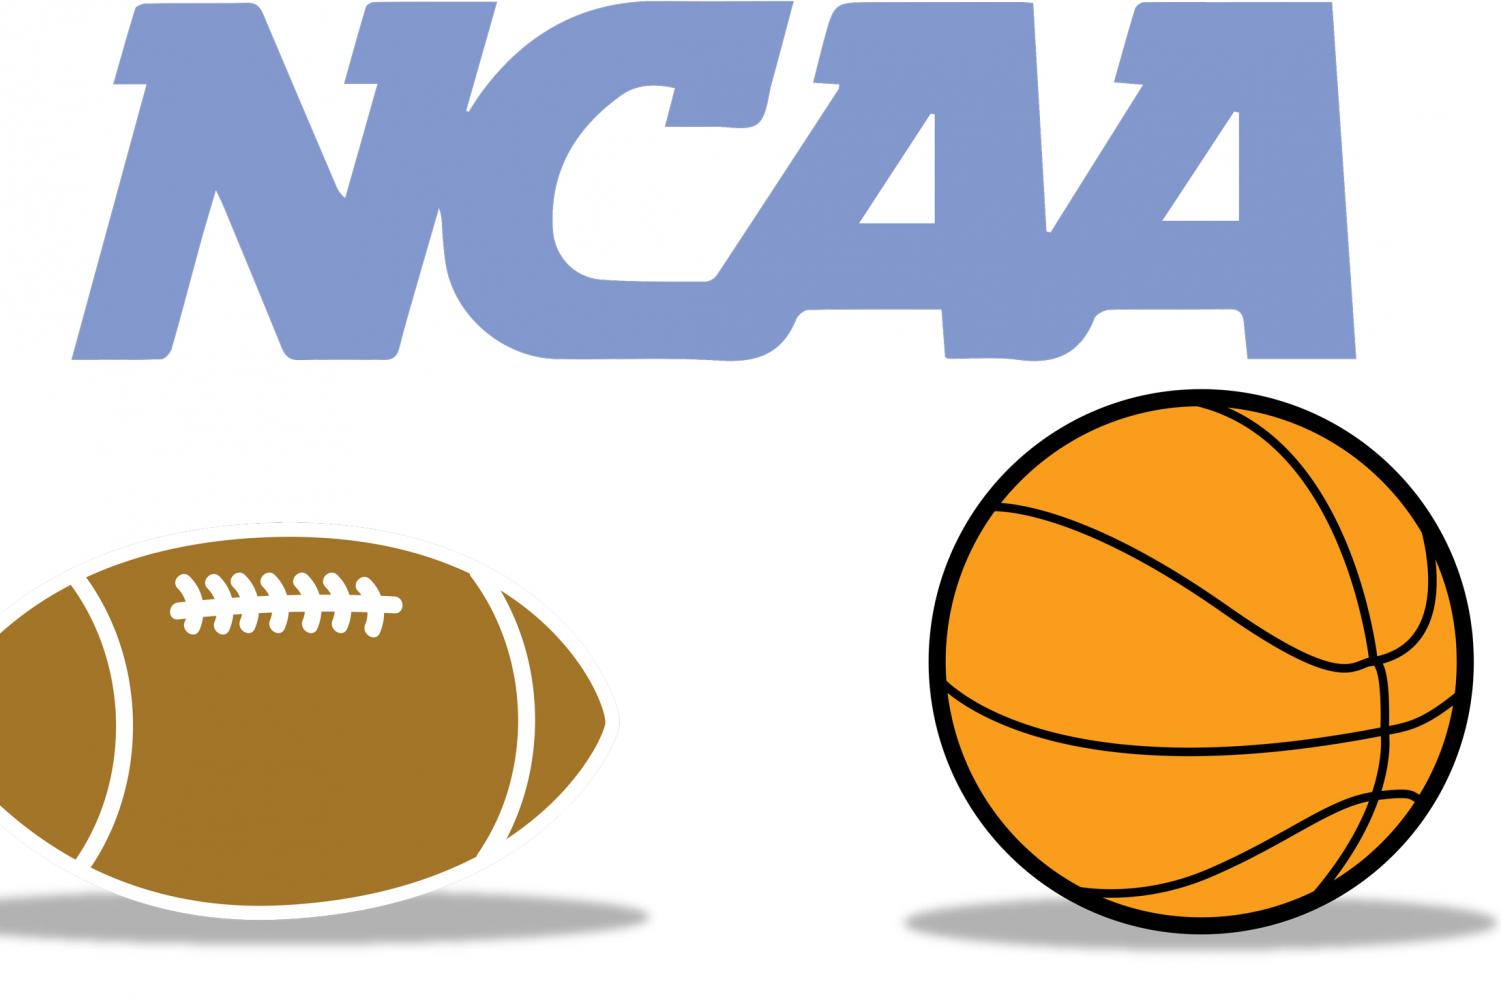 graphic of a football and basketball, with text above reading "NCAA"